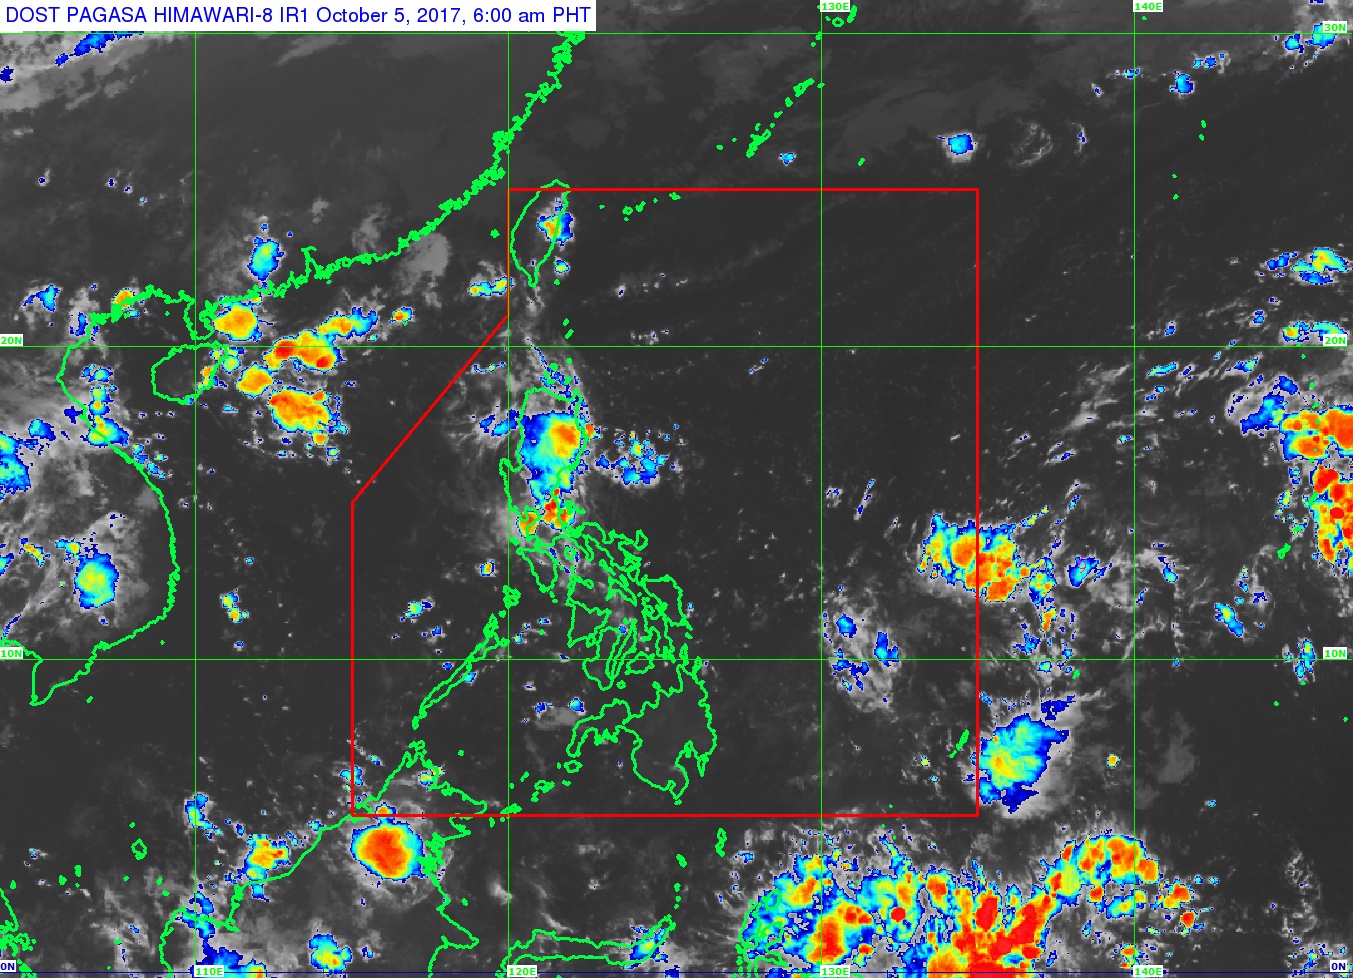 Satellite image as of October 5, 6 am. Image courtesy of PAGASA 